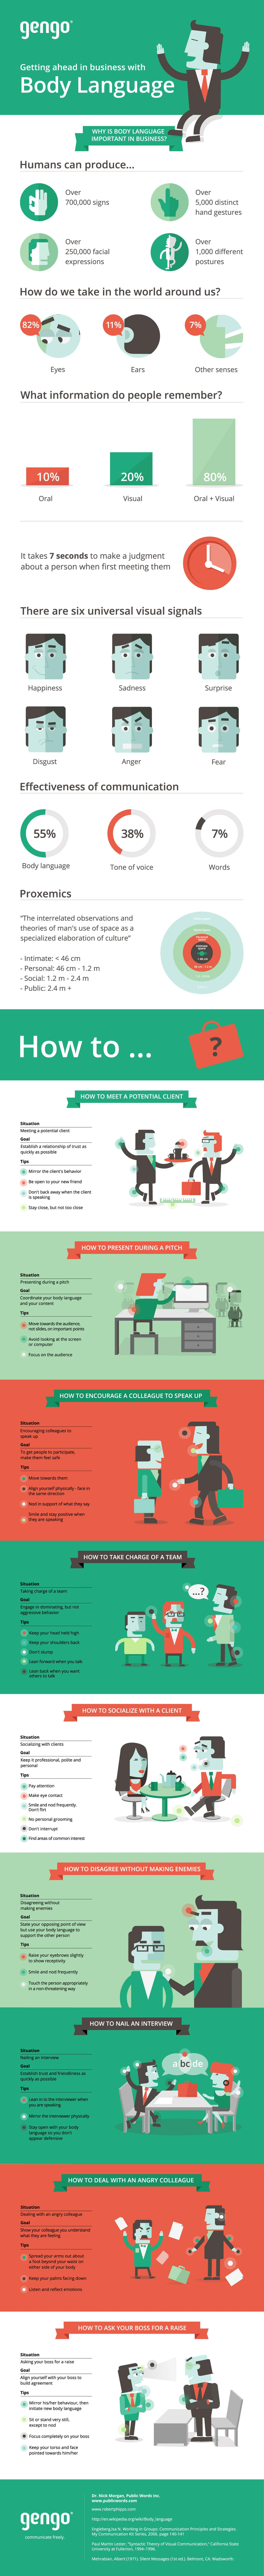 body language in business infographic